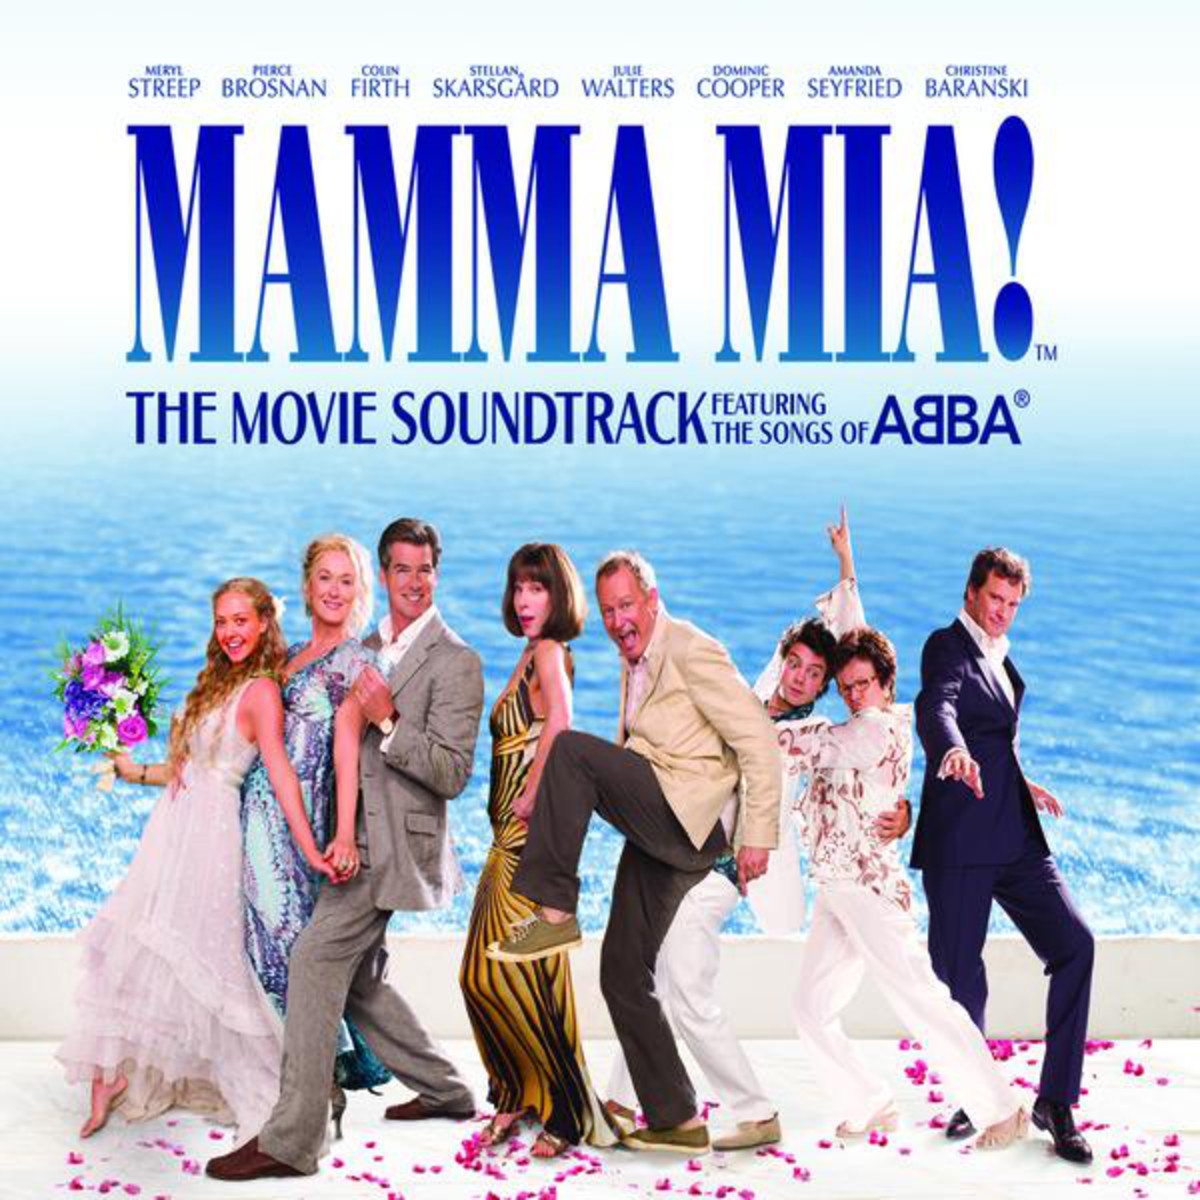 Thank You For The Music - From "Mamma Mia!" Soundtrack